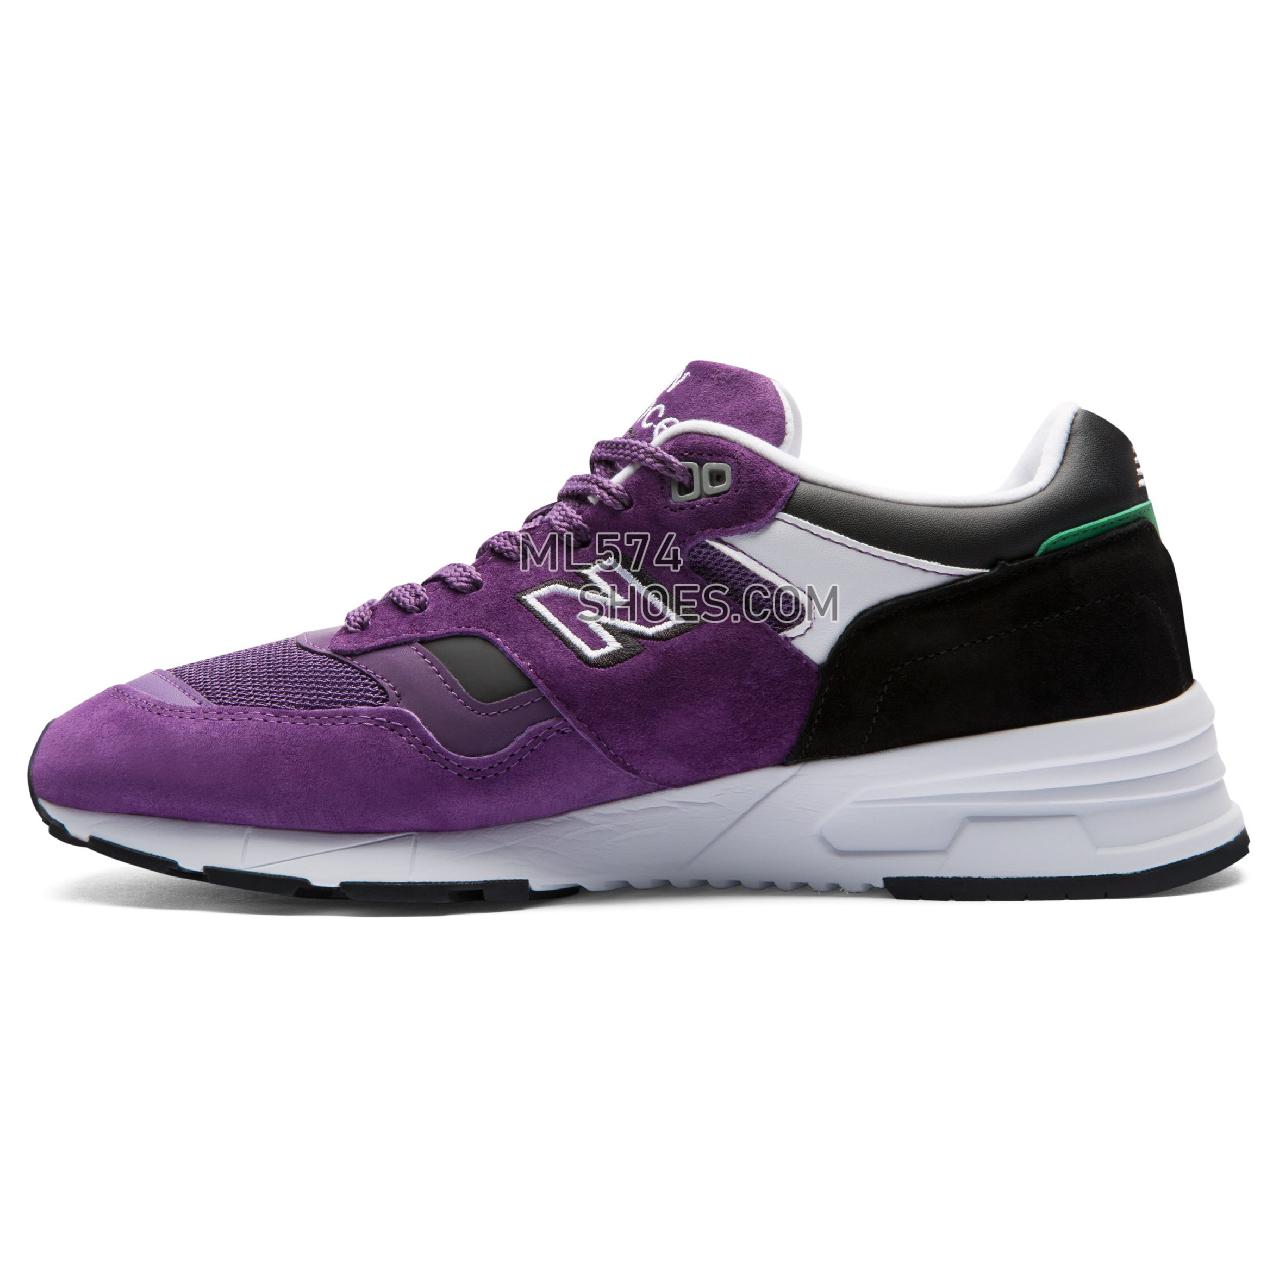 New Balance Made in UK 1530 Racq Pacq - Men's Made in UK 1530 Racq Pacq ML1530V1-23751-M - Purple with Black and Green - M1530CRT